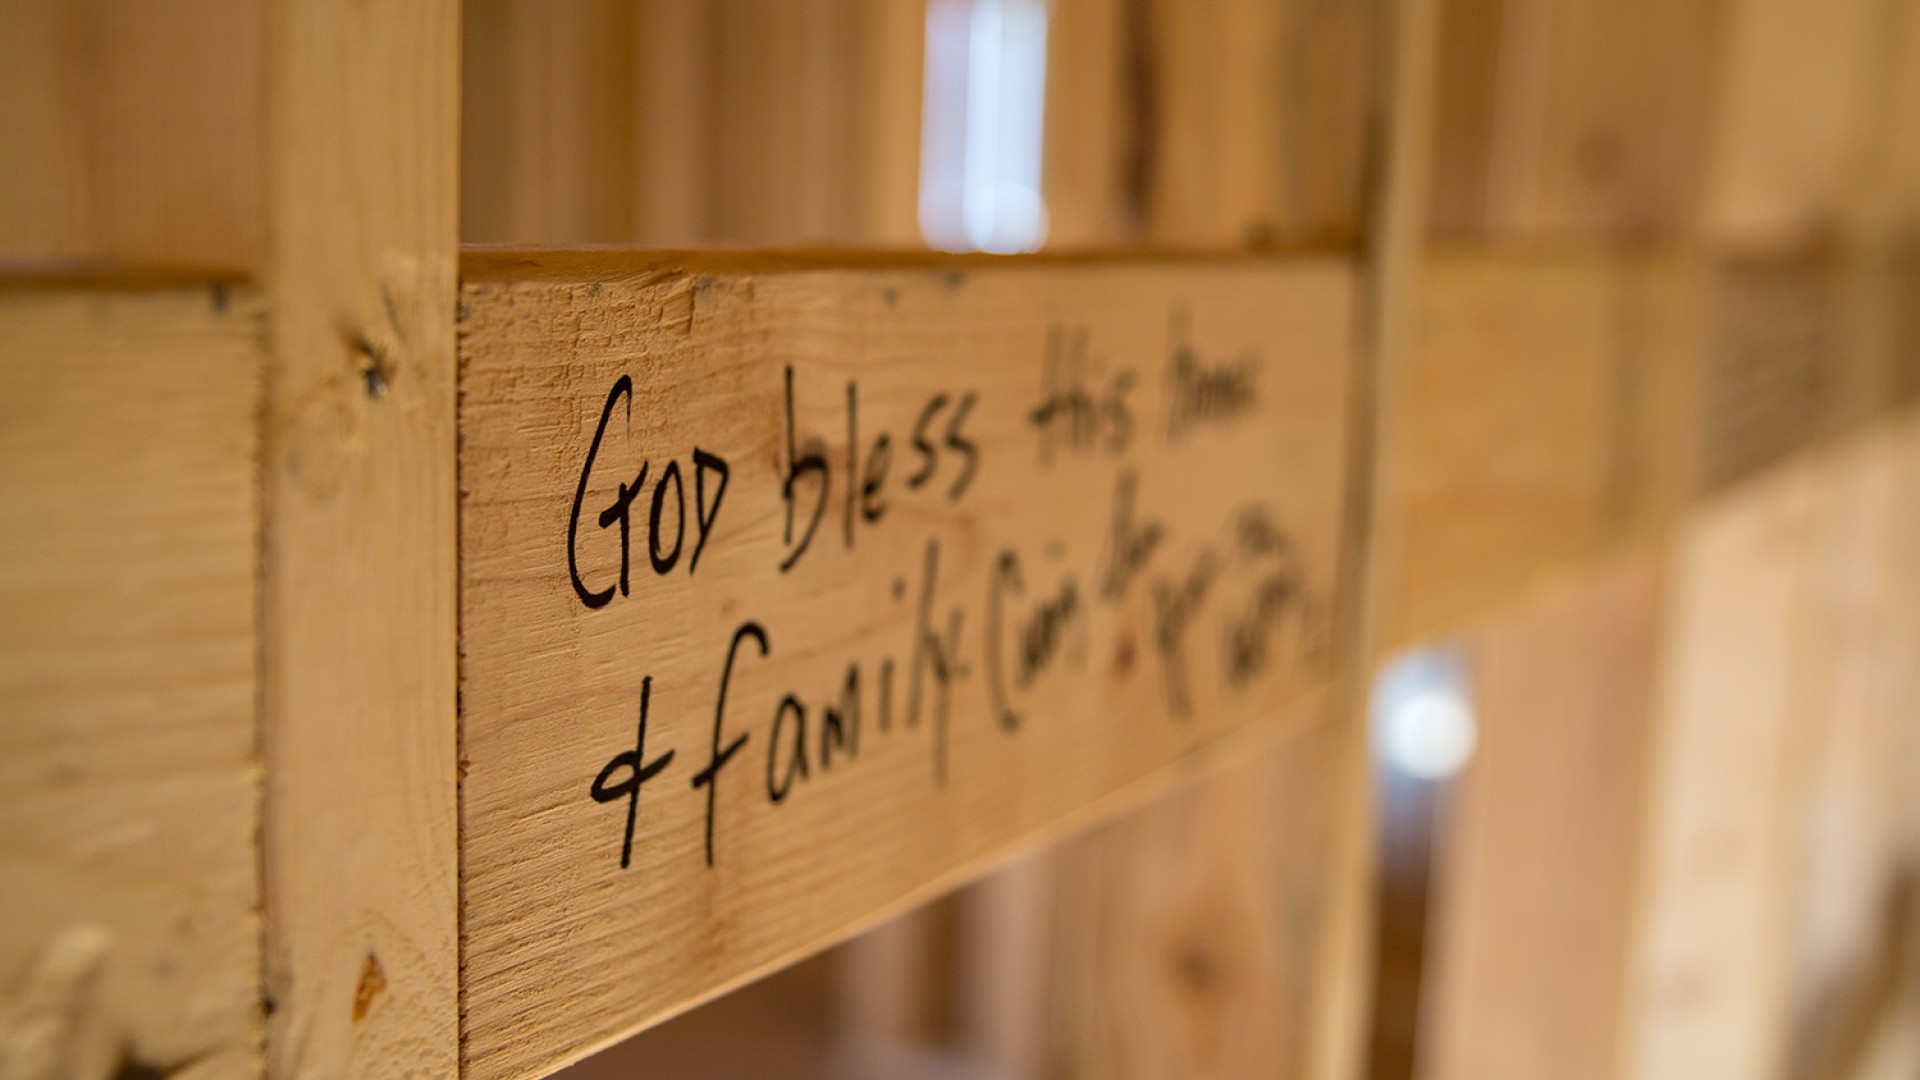 A Biblical saying is written on the wall of a Mountain Outreach home